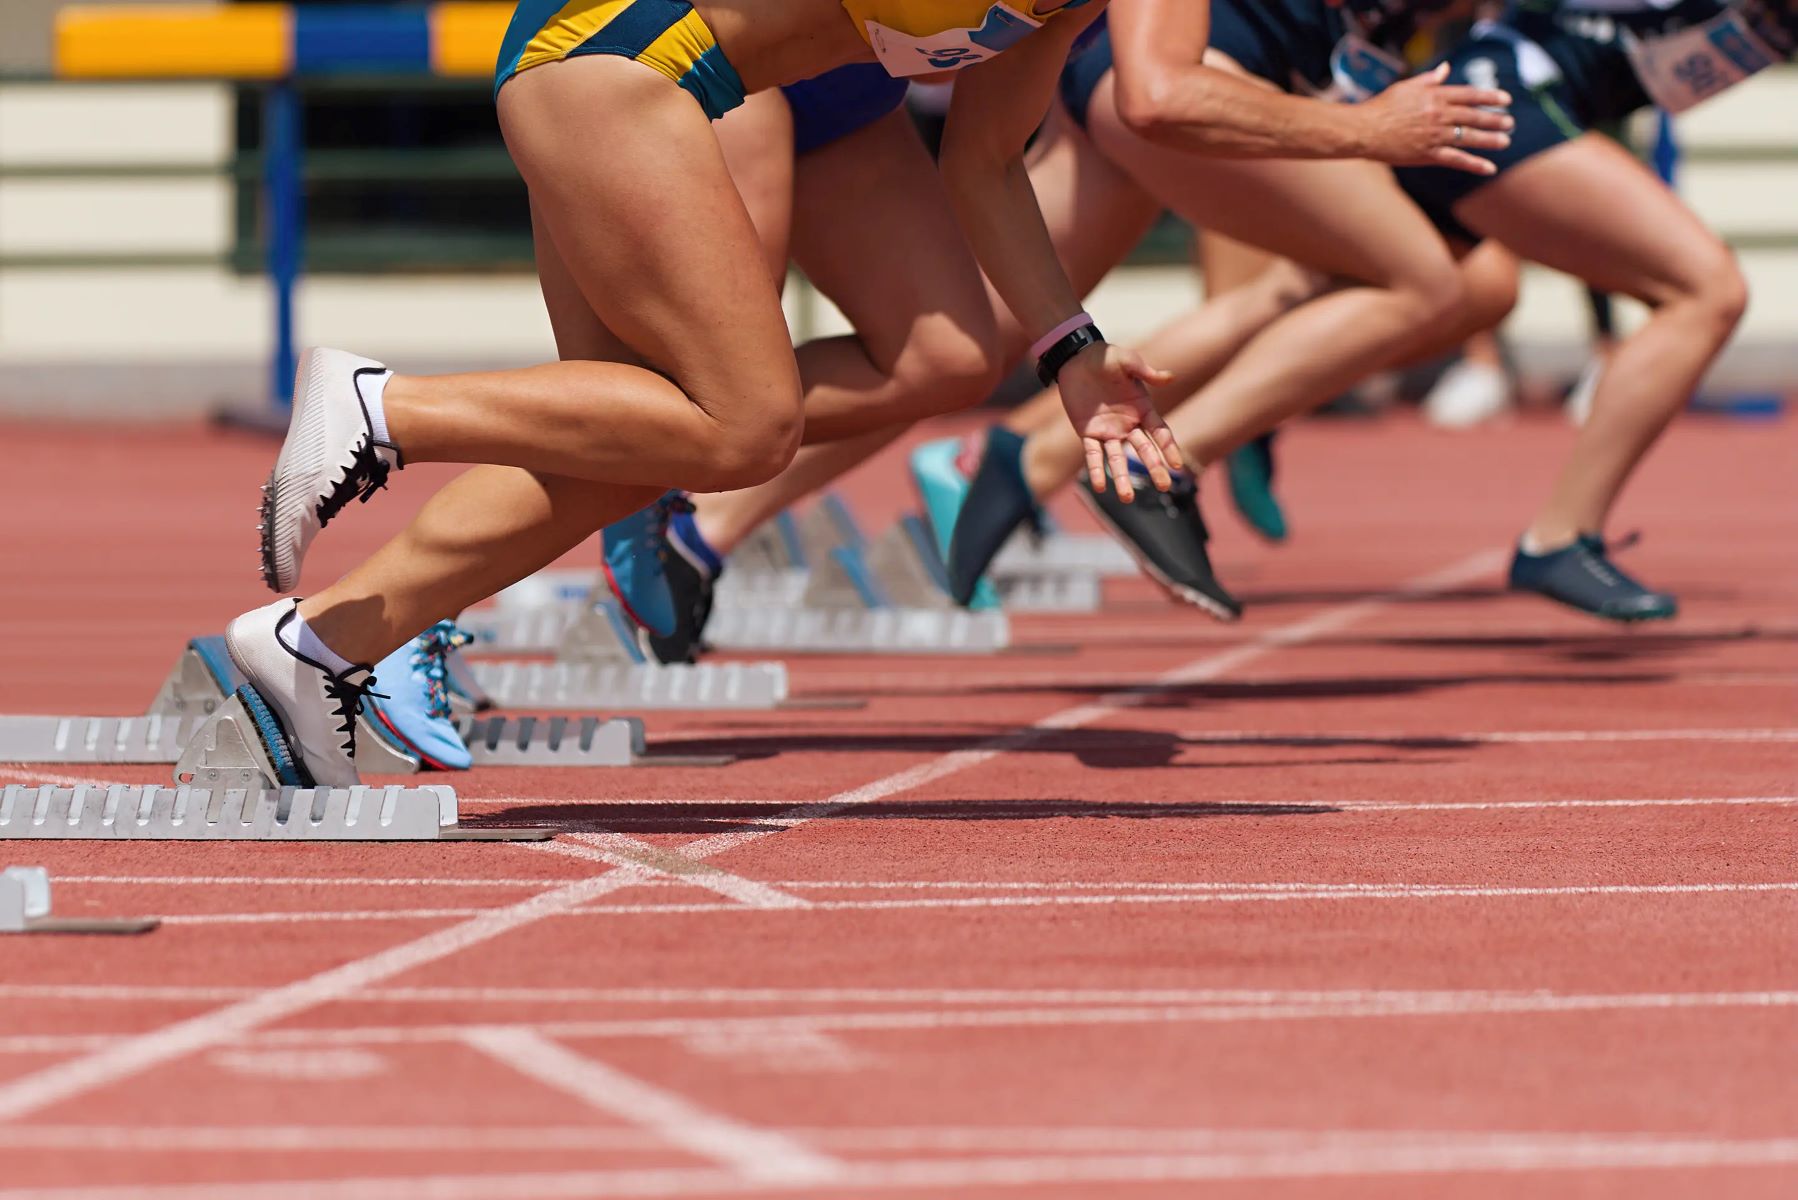 What Factor Should Be Considered When Establishing The Sprint Length?